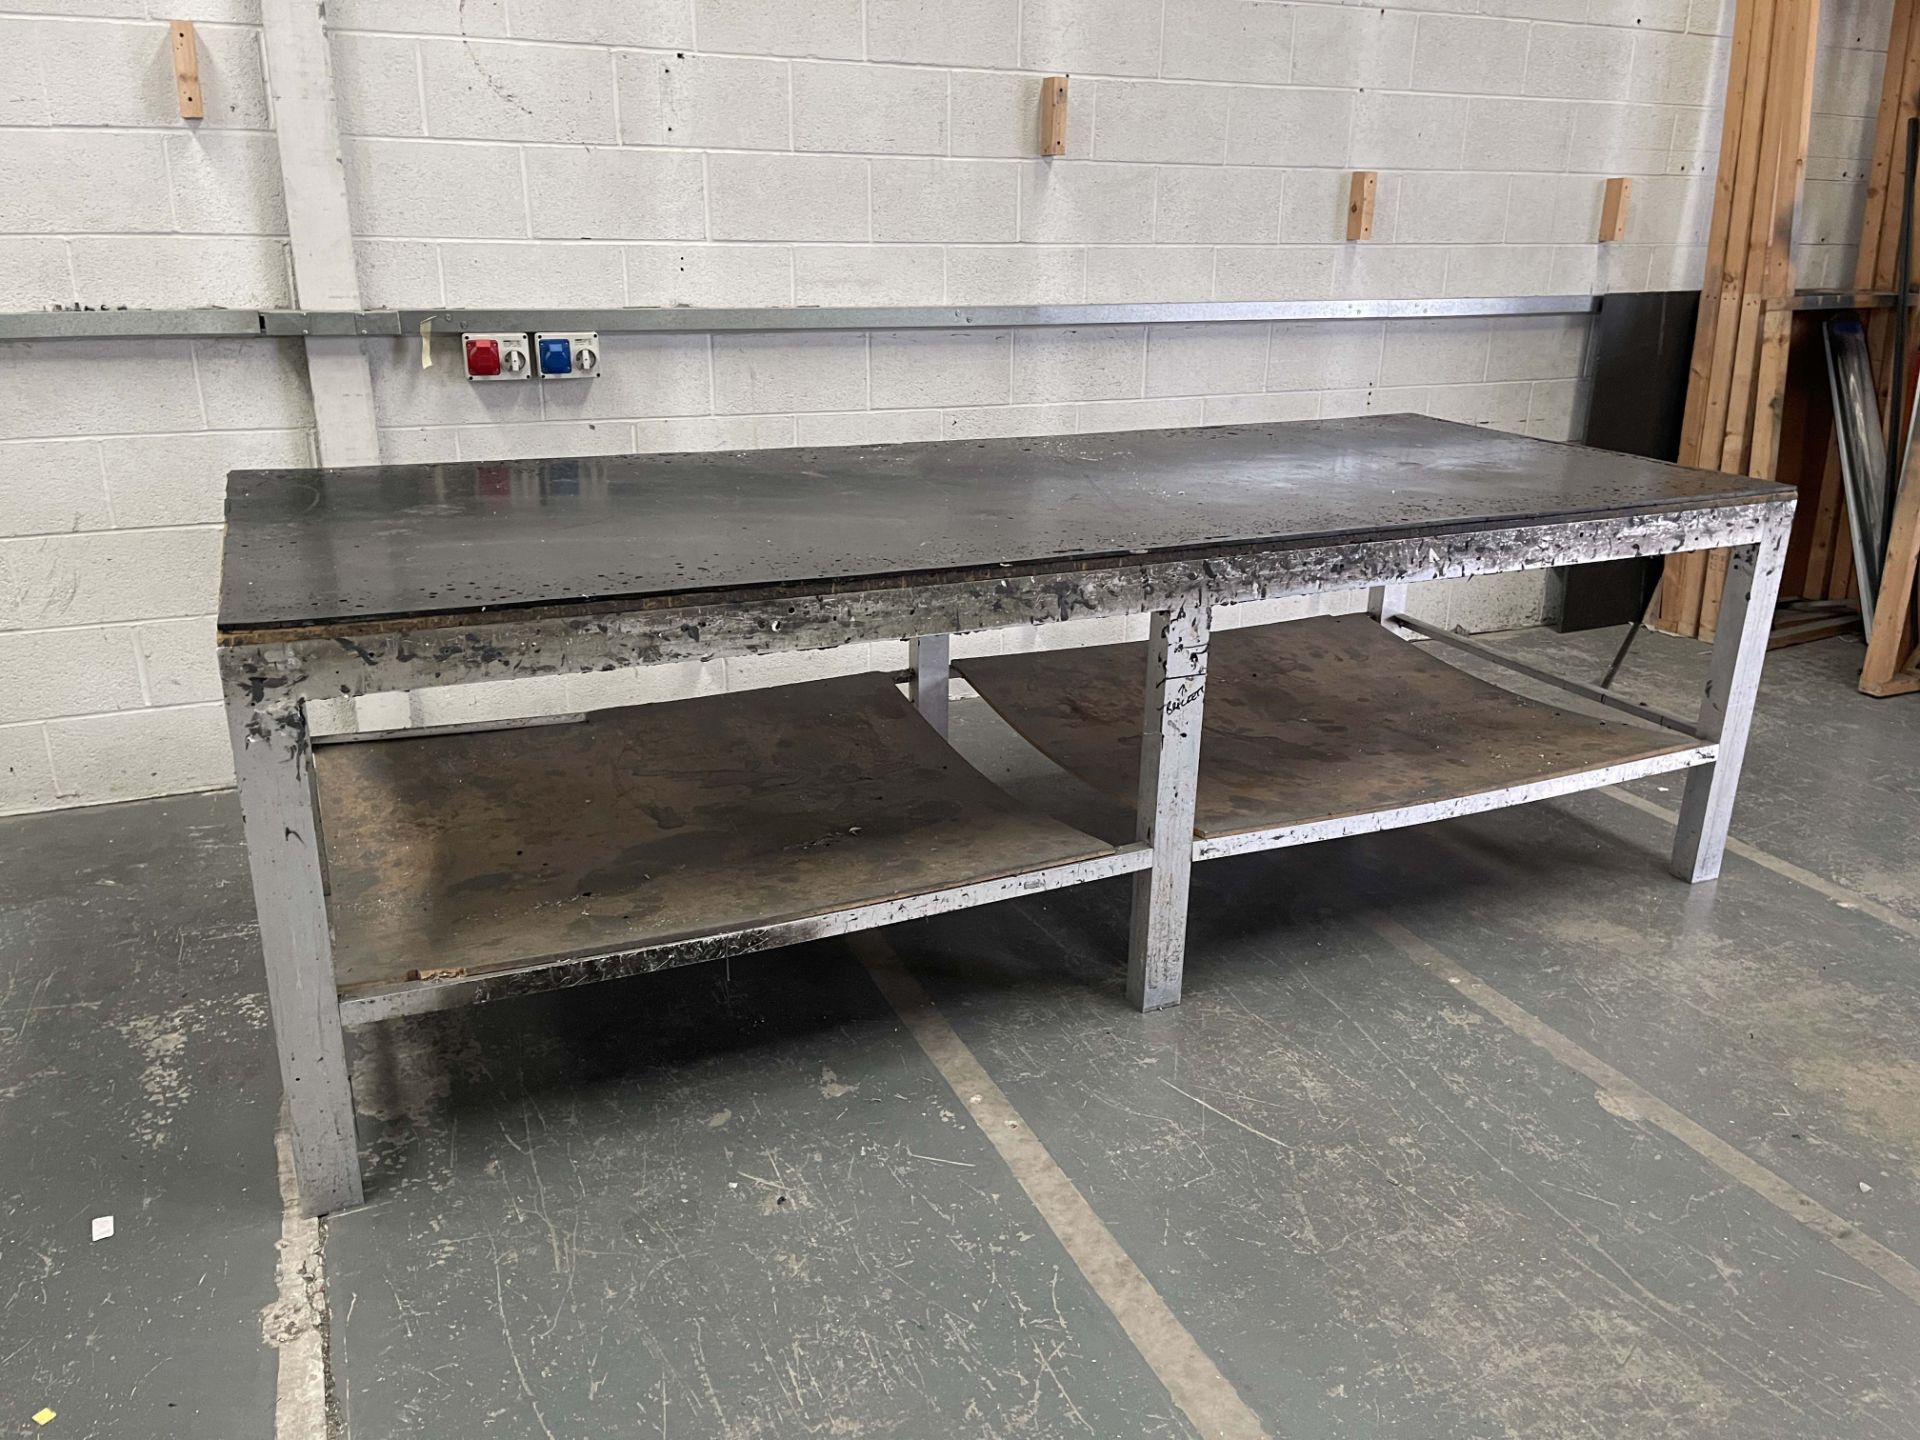 Aluminium Workbench With Rubber Top. Size: 10' x 4' x 3'1" High. - Image 2 of 3